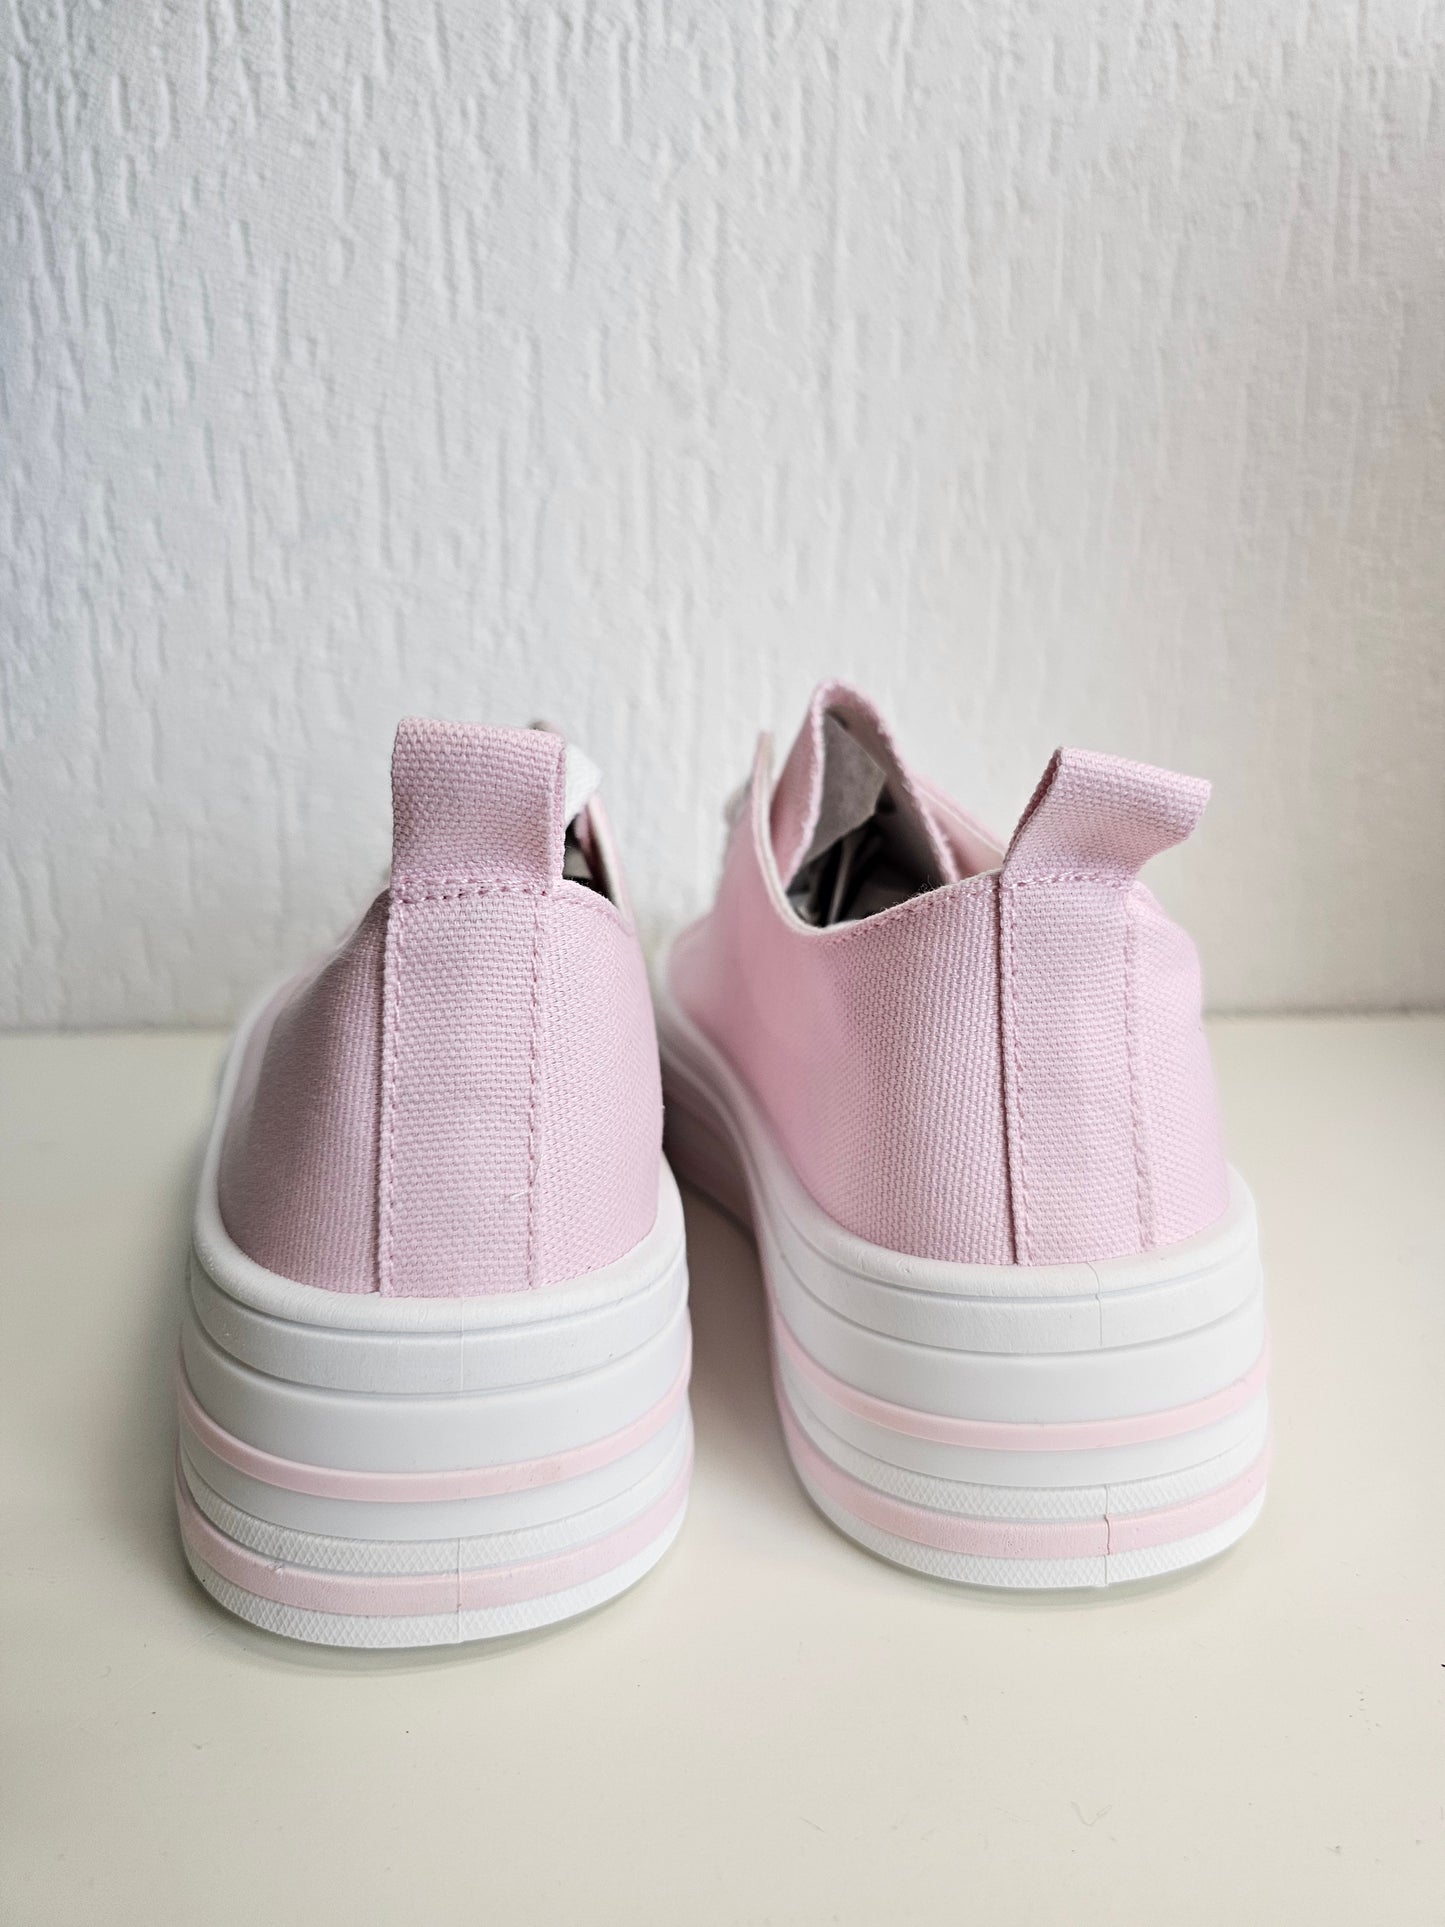 Sneaker in Rosa Canvas Stoff-Turnschuhe